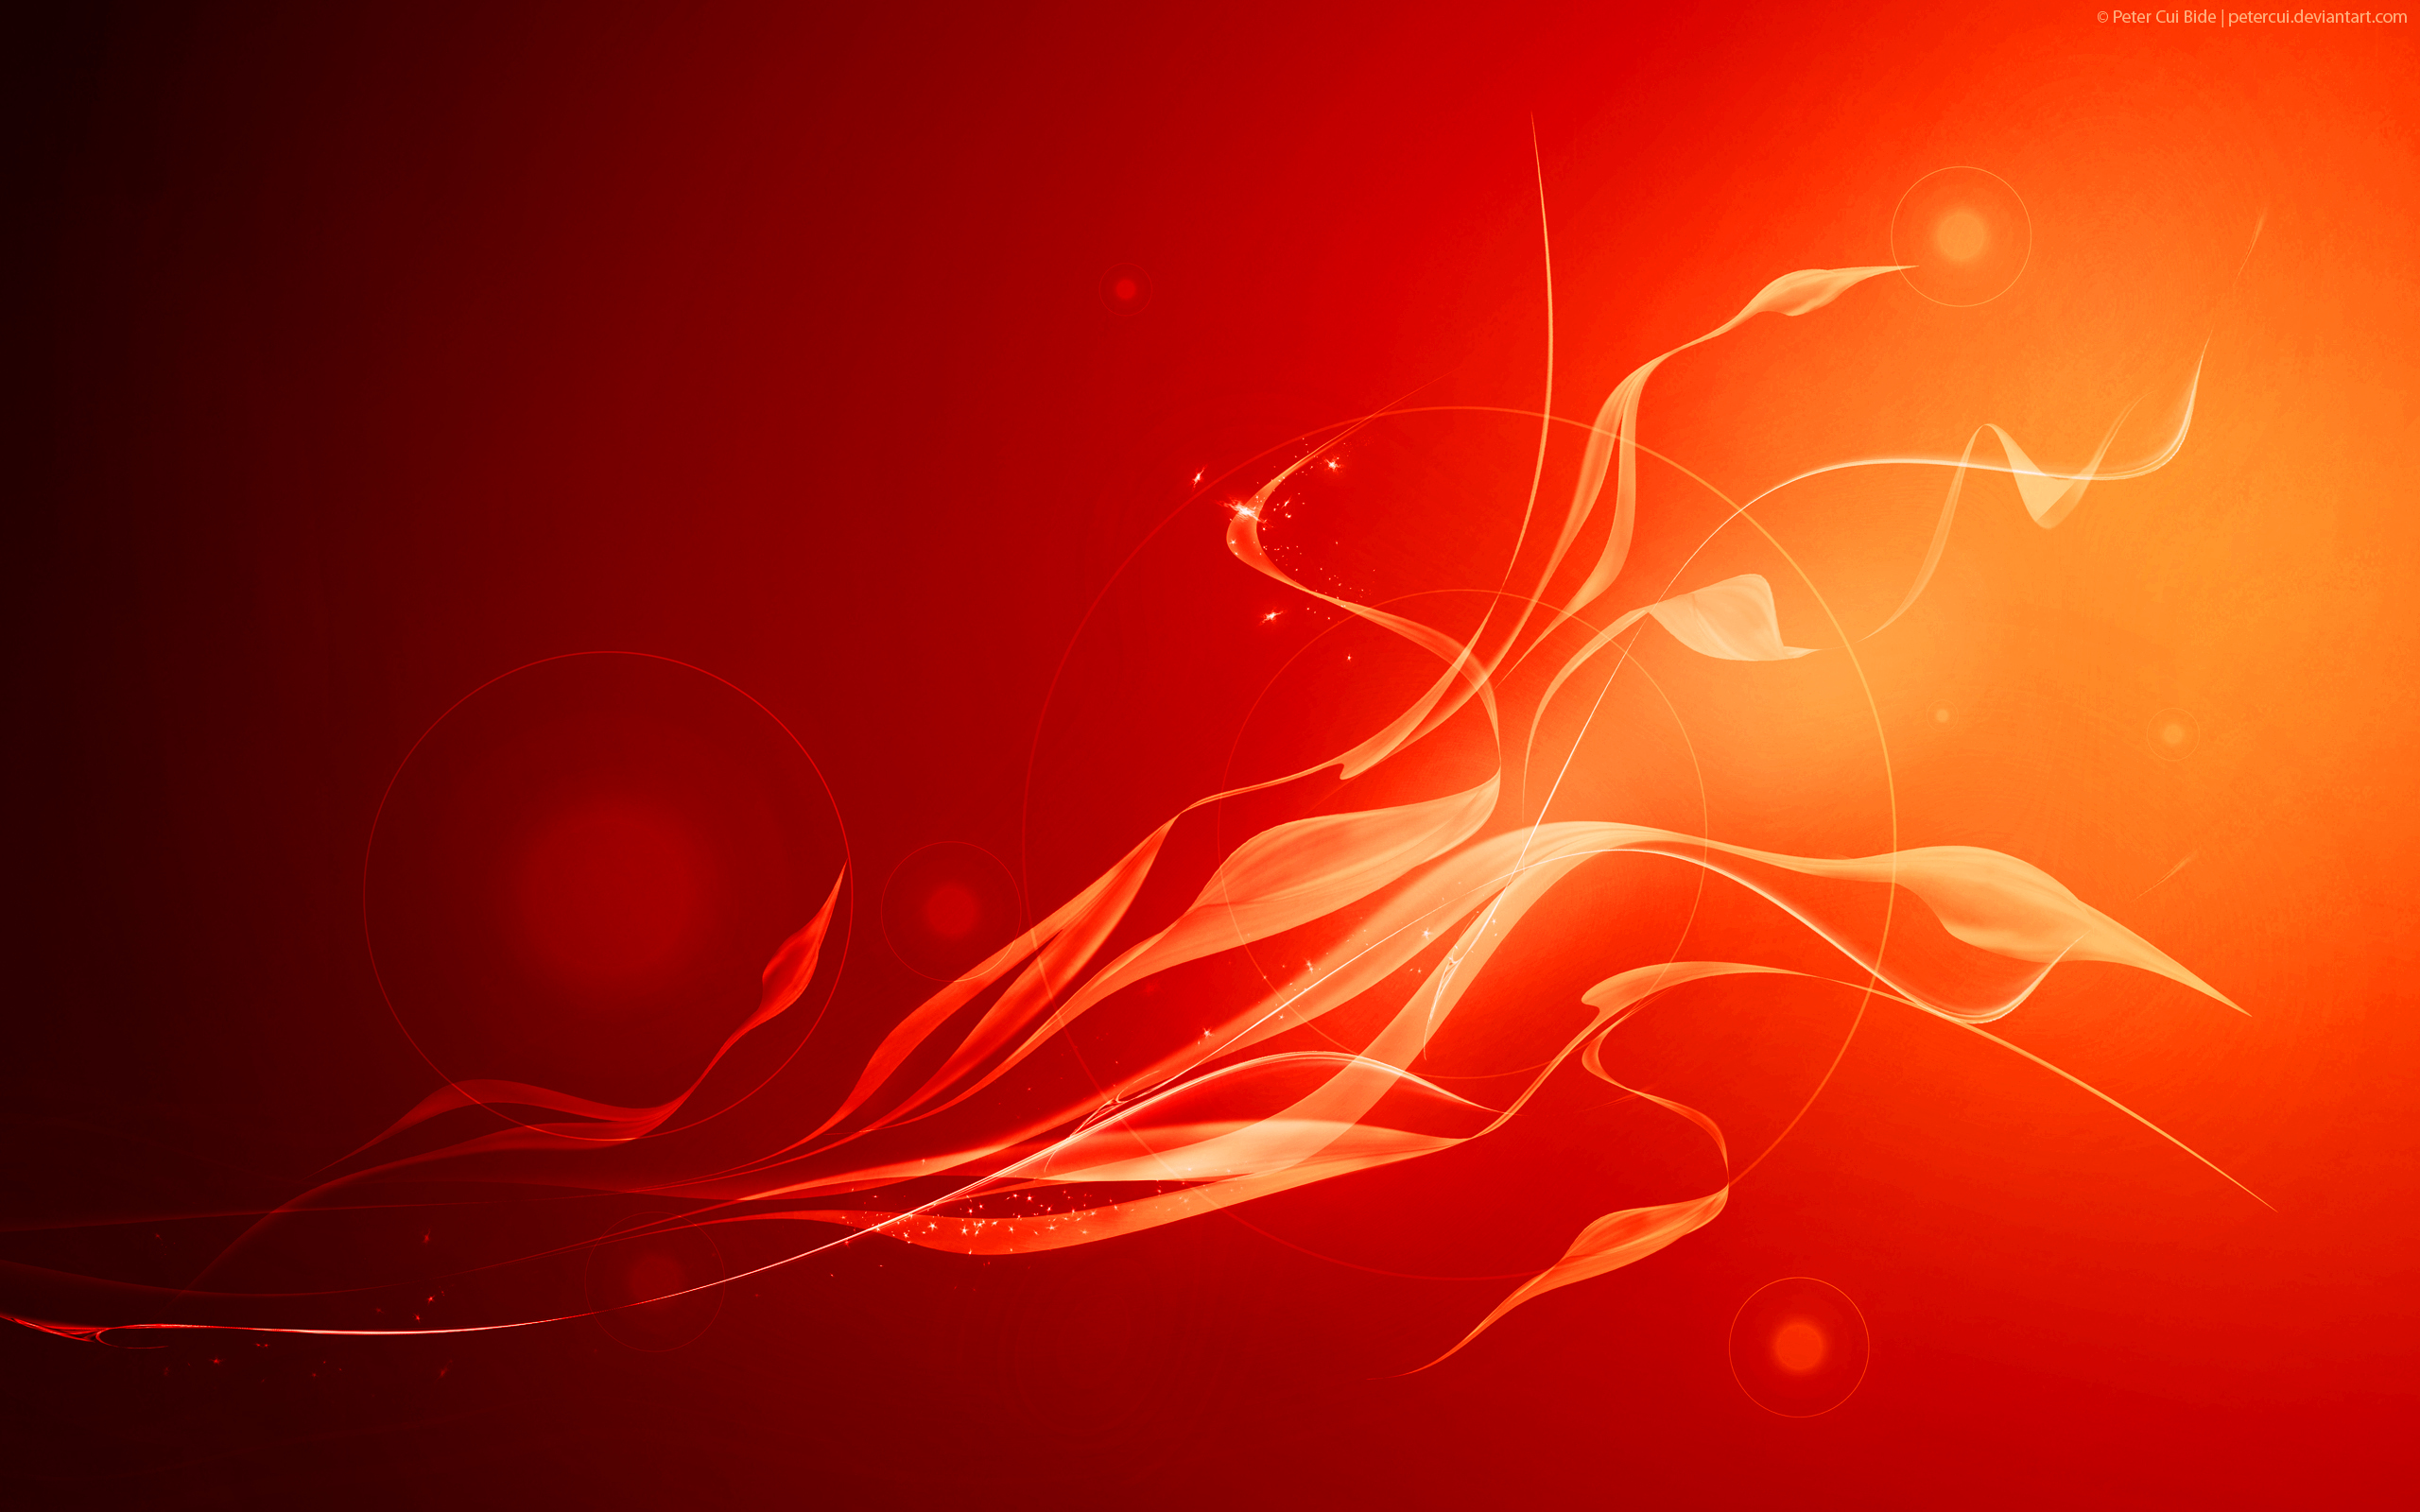 40 Crisp Red Wallpapers For Desktop Laptop and Tablet Devices 2560x1600